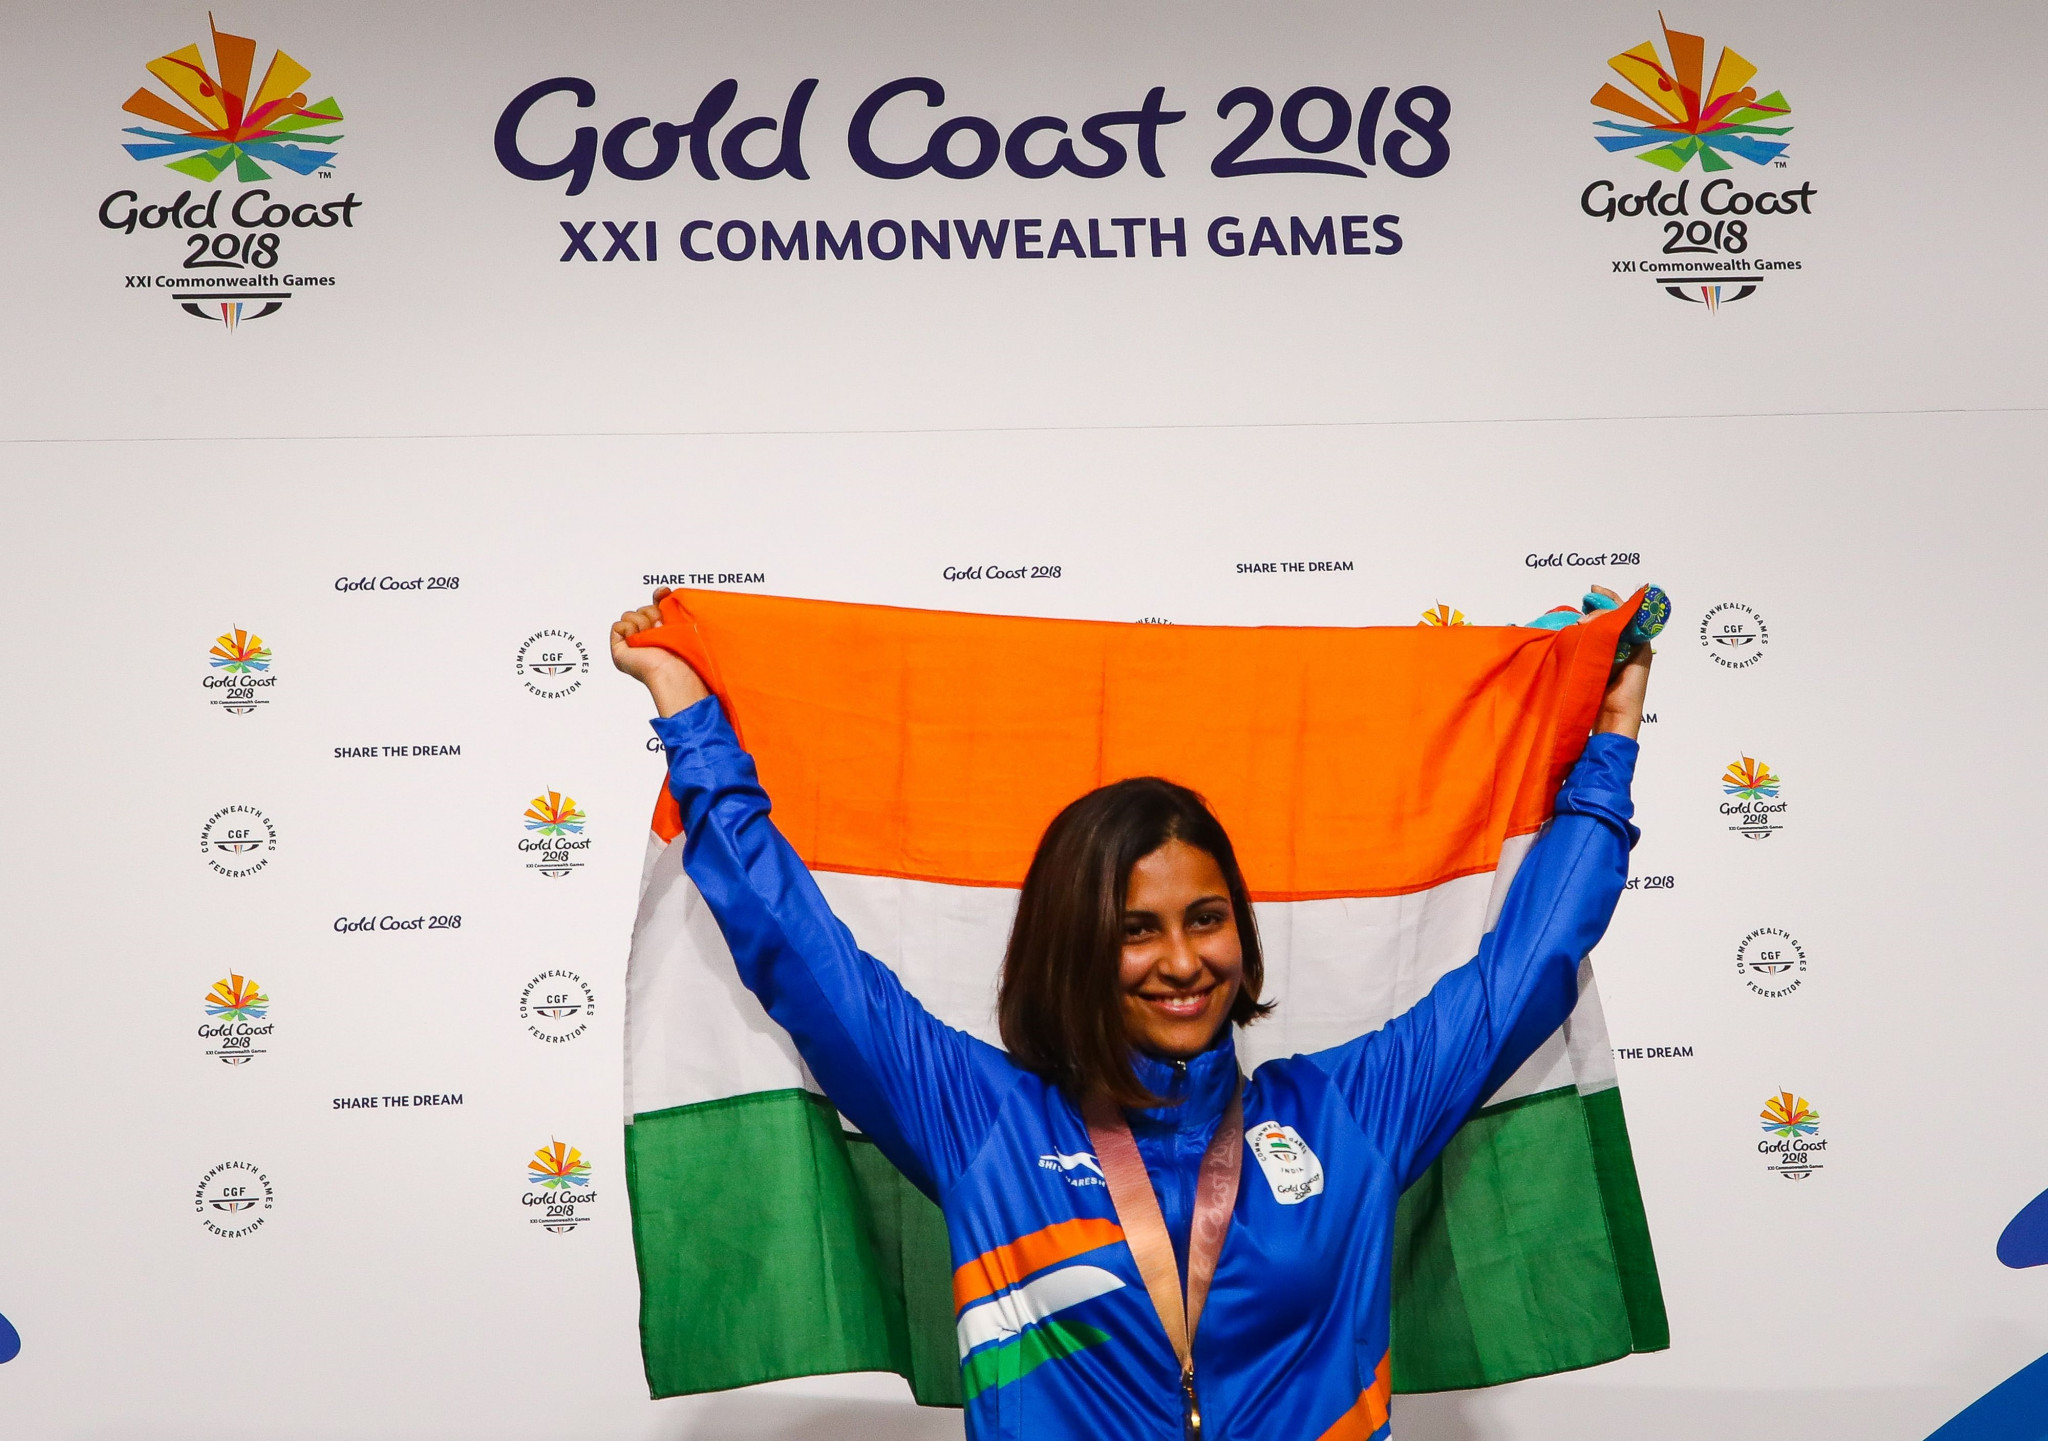 Heena Sindu is a two-time Commonwealth Games champion with her last gold coming at Gold Coast 2018 ©Getty Images